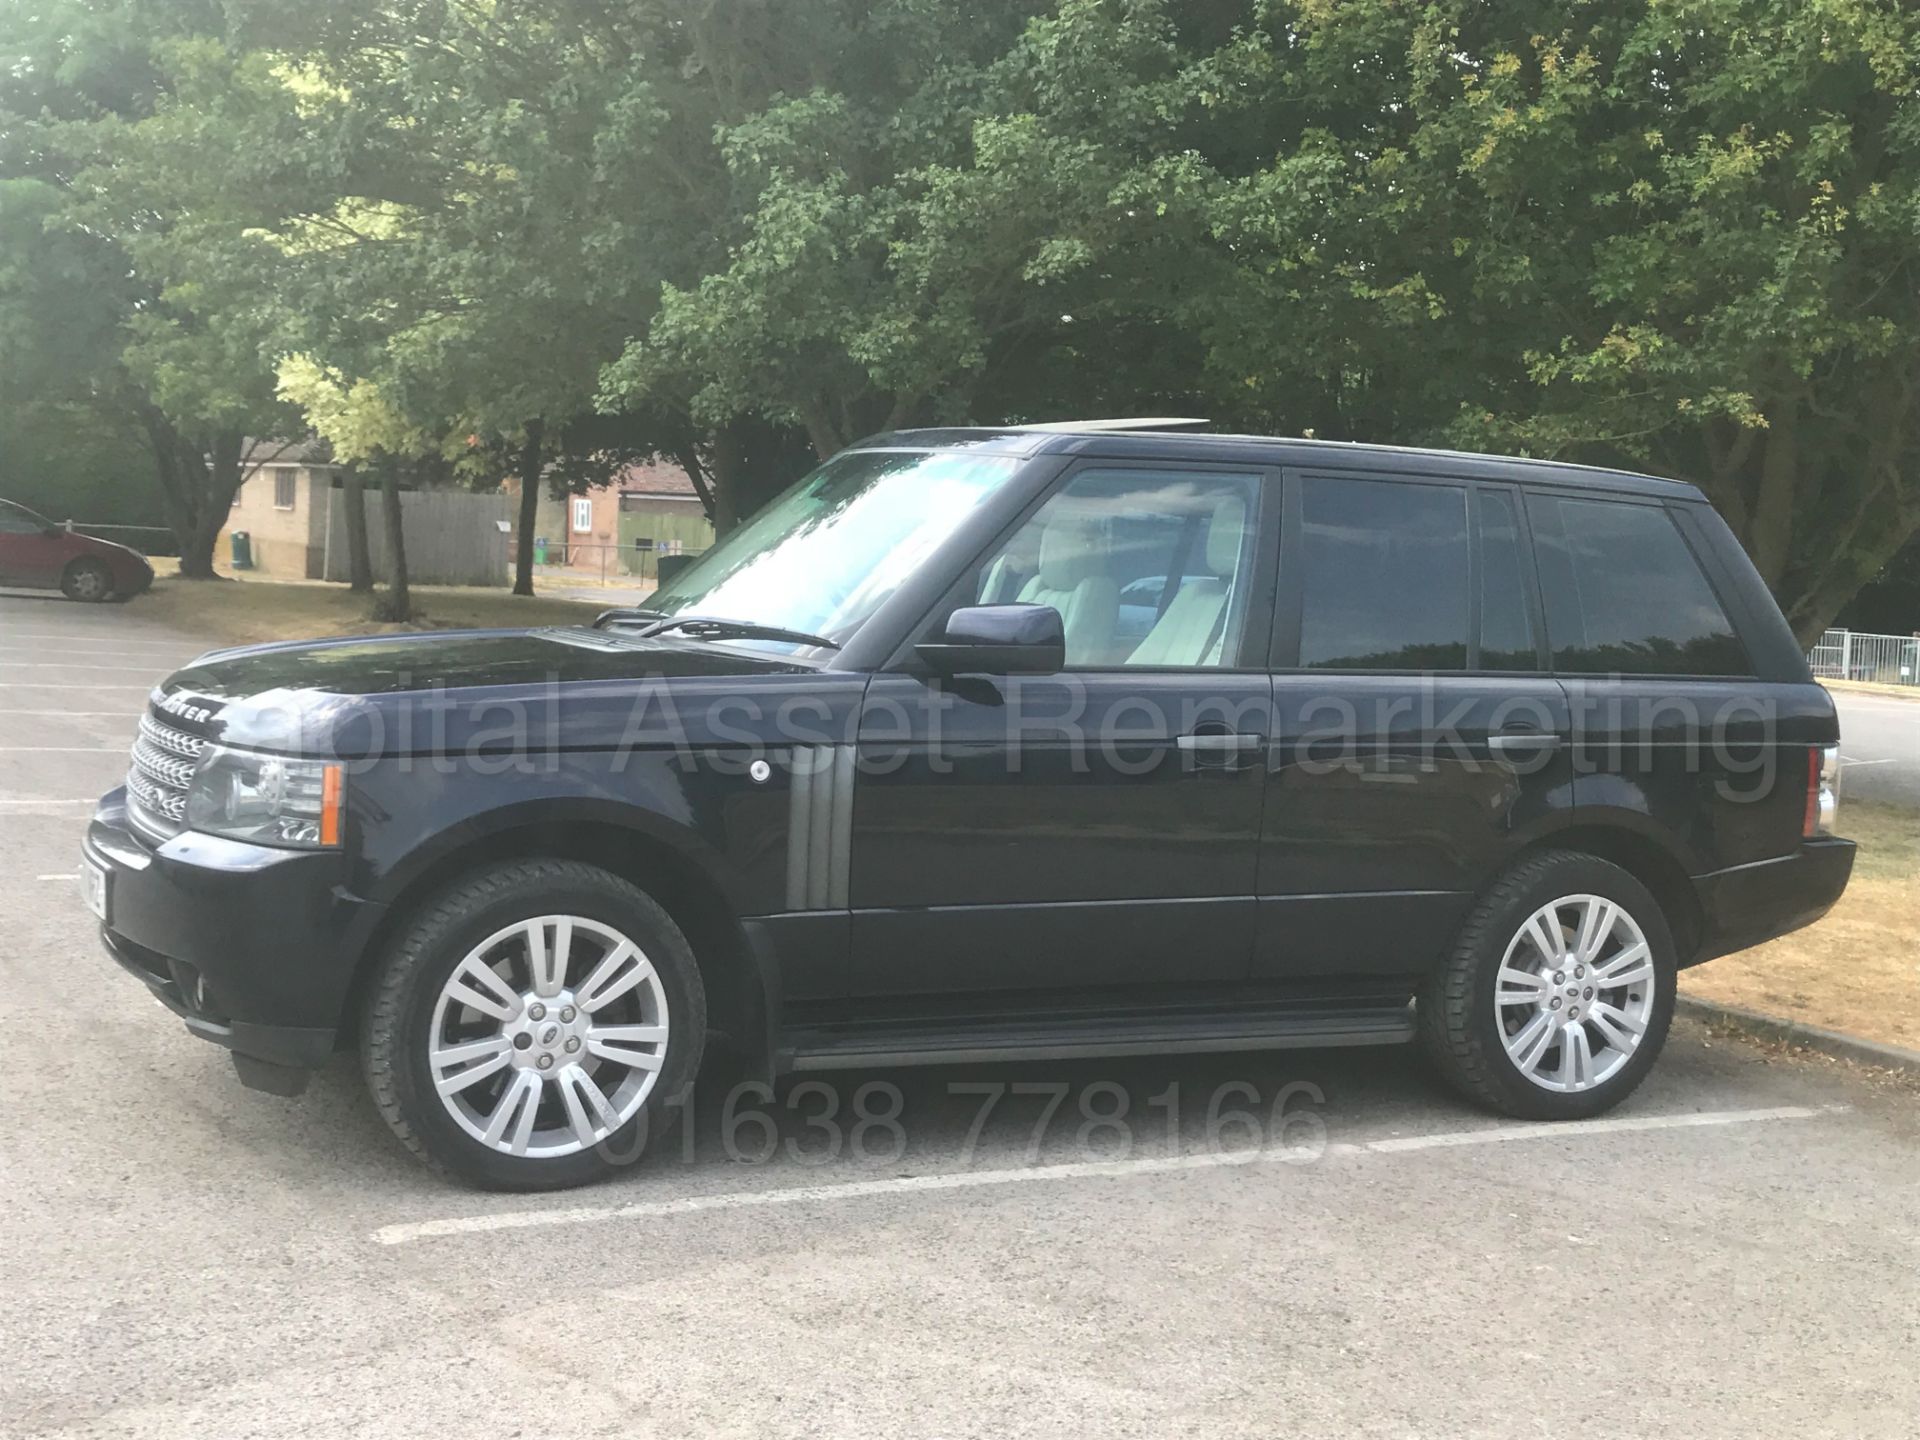 (On Sale) RANGE ROVER VOGUE **SE EDITION** (2010 - FACELIFT EDITION) 'TDV8 - 268 BHP - AUTO' **WOW** - Image 7 of 62